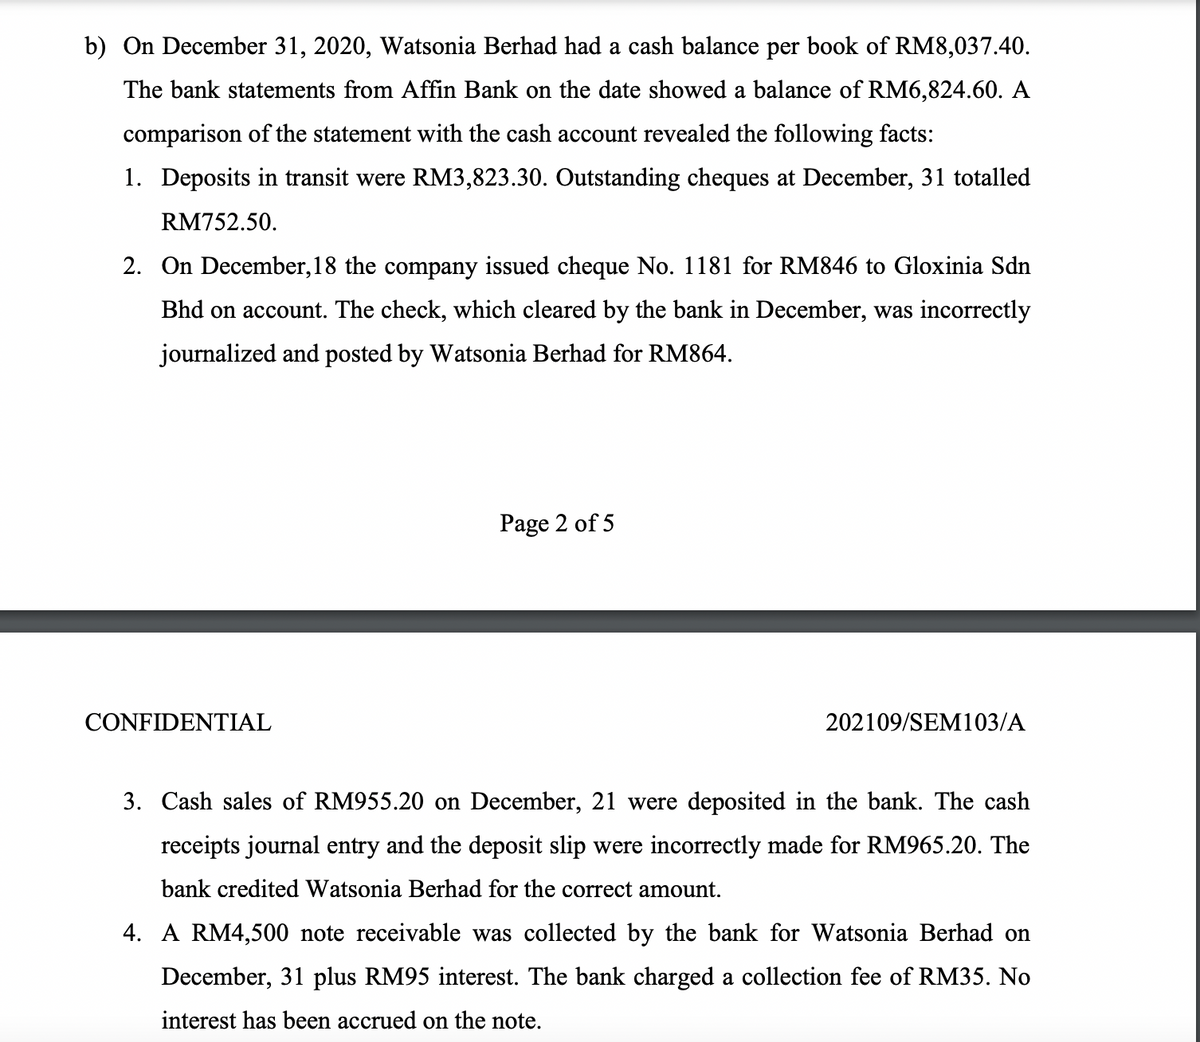 b) On December 31, 2020, Watsonia Berhad had a cash balance per book of RM8,037.40.
The bank statements from Affin Bank on the date showed a balance of RM6,824.60. A
comparison of the statement with the cash account revealed the following facts:
1. Deposits in transit were RM3,823.30. Outstanding cheques at December, 31 totalled
RM752.50.
2. On December,18 the company issued cheque No. 1181 for RM846 to Gloxinia Sdn
Bhd on account. The check, which cleared by the bank in December, was incorrectly
journalized and posted by Watsonia Berhad for RM864.
Page 2 of 5
CONFIDENTIAL
202109/SEM103/A
3. Cash sales of RM955.20 on December, 21 were deposited in the bank. The cash
receipts journal entry and the deposit slip were incorrectly made for RM965.20. The
bank credited Watsonia Berhad for the correct amount.
4. A RM4,500 note receivable was collected by the bank for Watsonia Berhad on
December, 31 plus RM95 interest. The bank charged a collection fee of RM35. No
interest has been accrued on the note.
